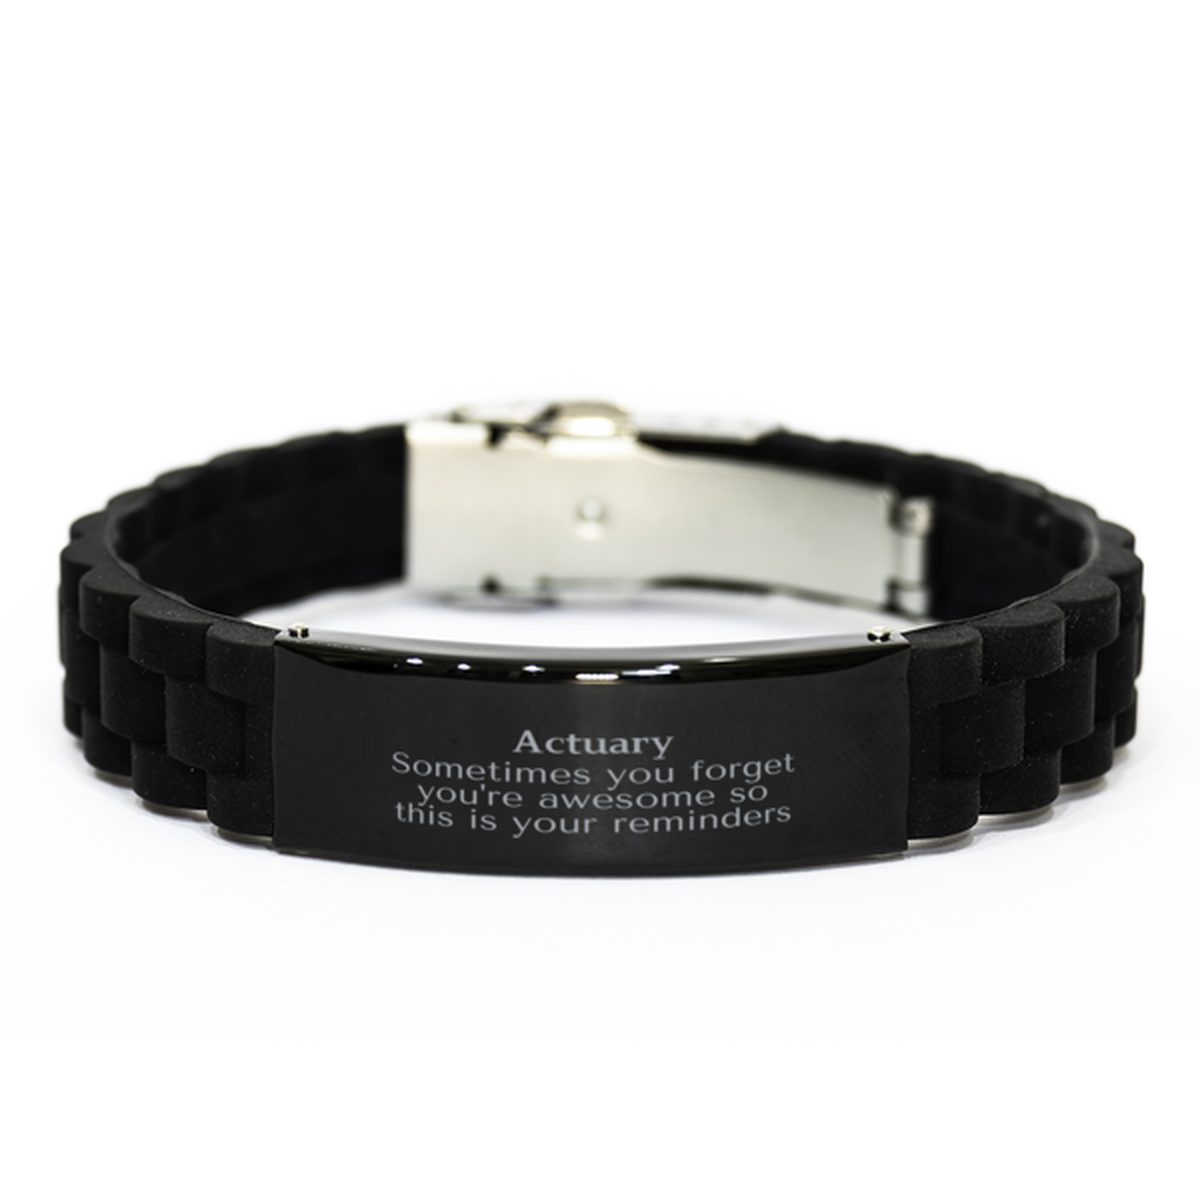 Sentimental Actuary Black Glidelock Clasp Bracelet, Actuary Sometimes you forget you're awesome so this is your reminders, Graduation Christmas Birthday Gifts for Actuary, Men, Women, Coworkers